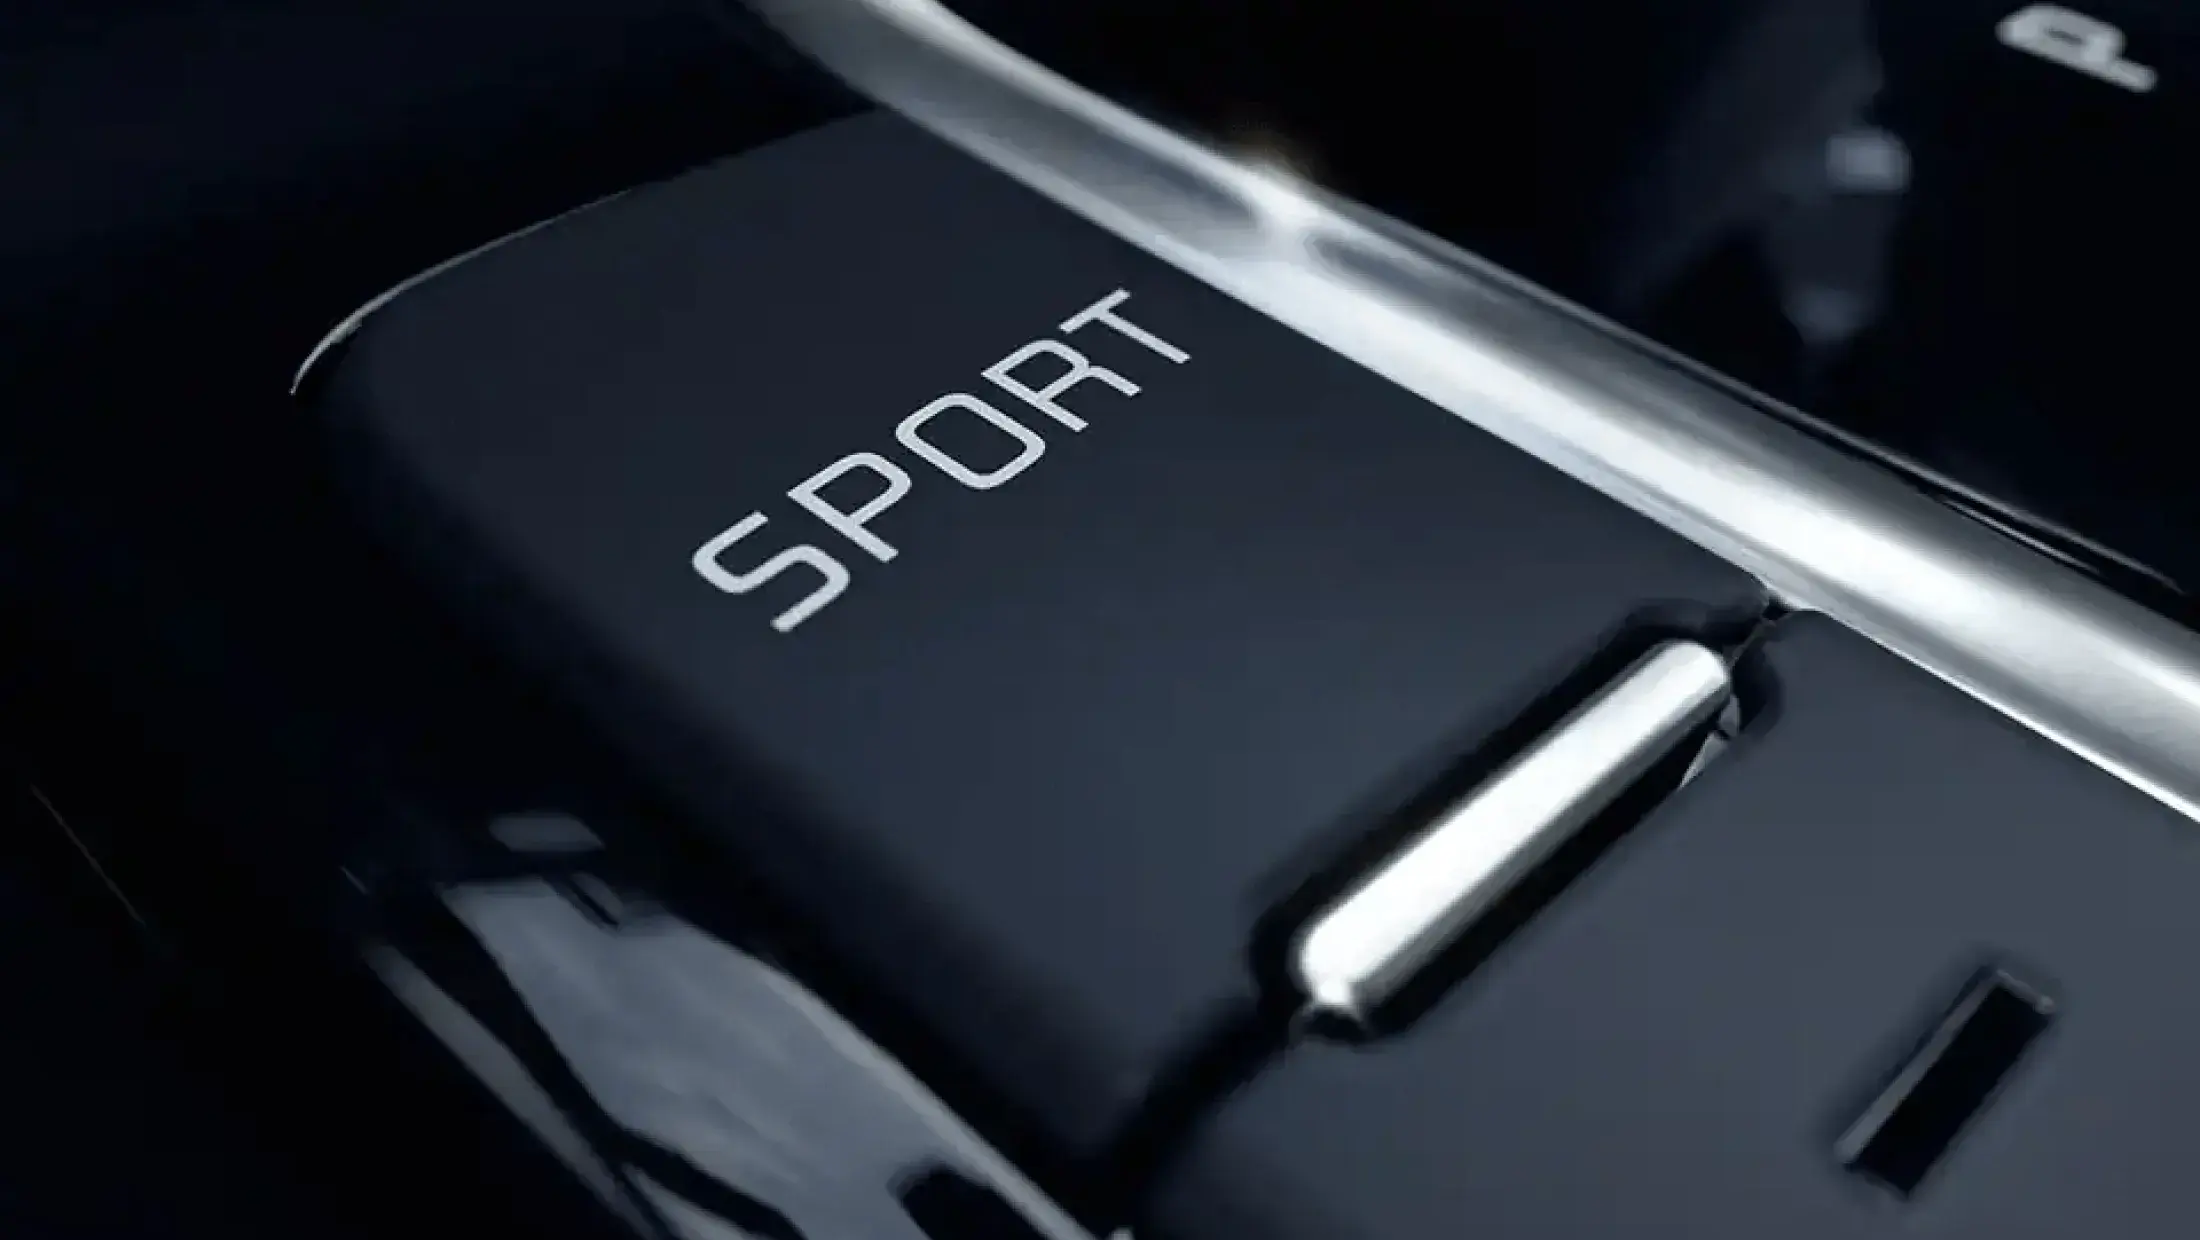 ProCeed sport mode